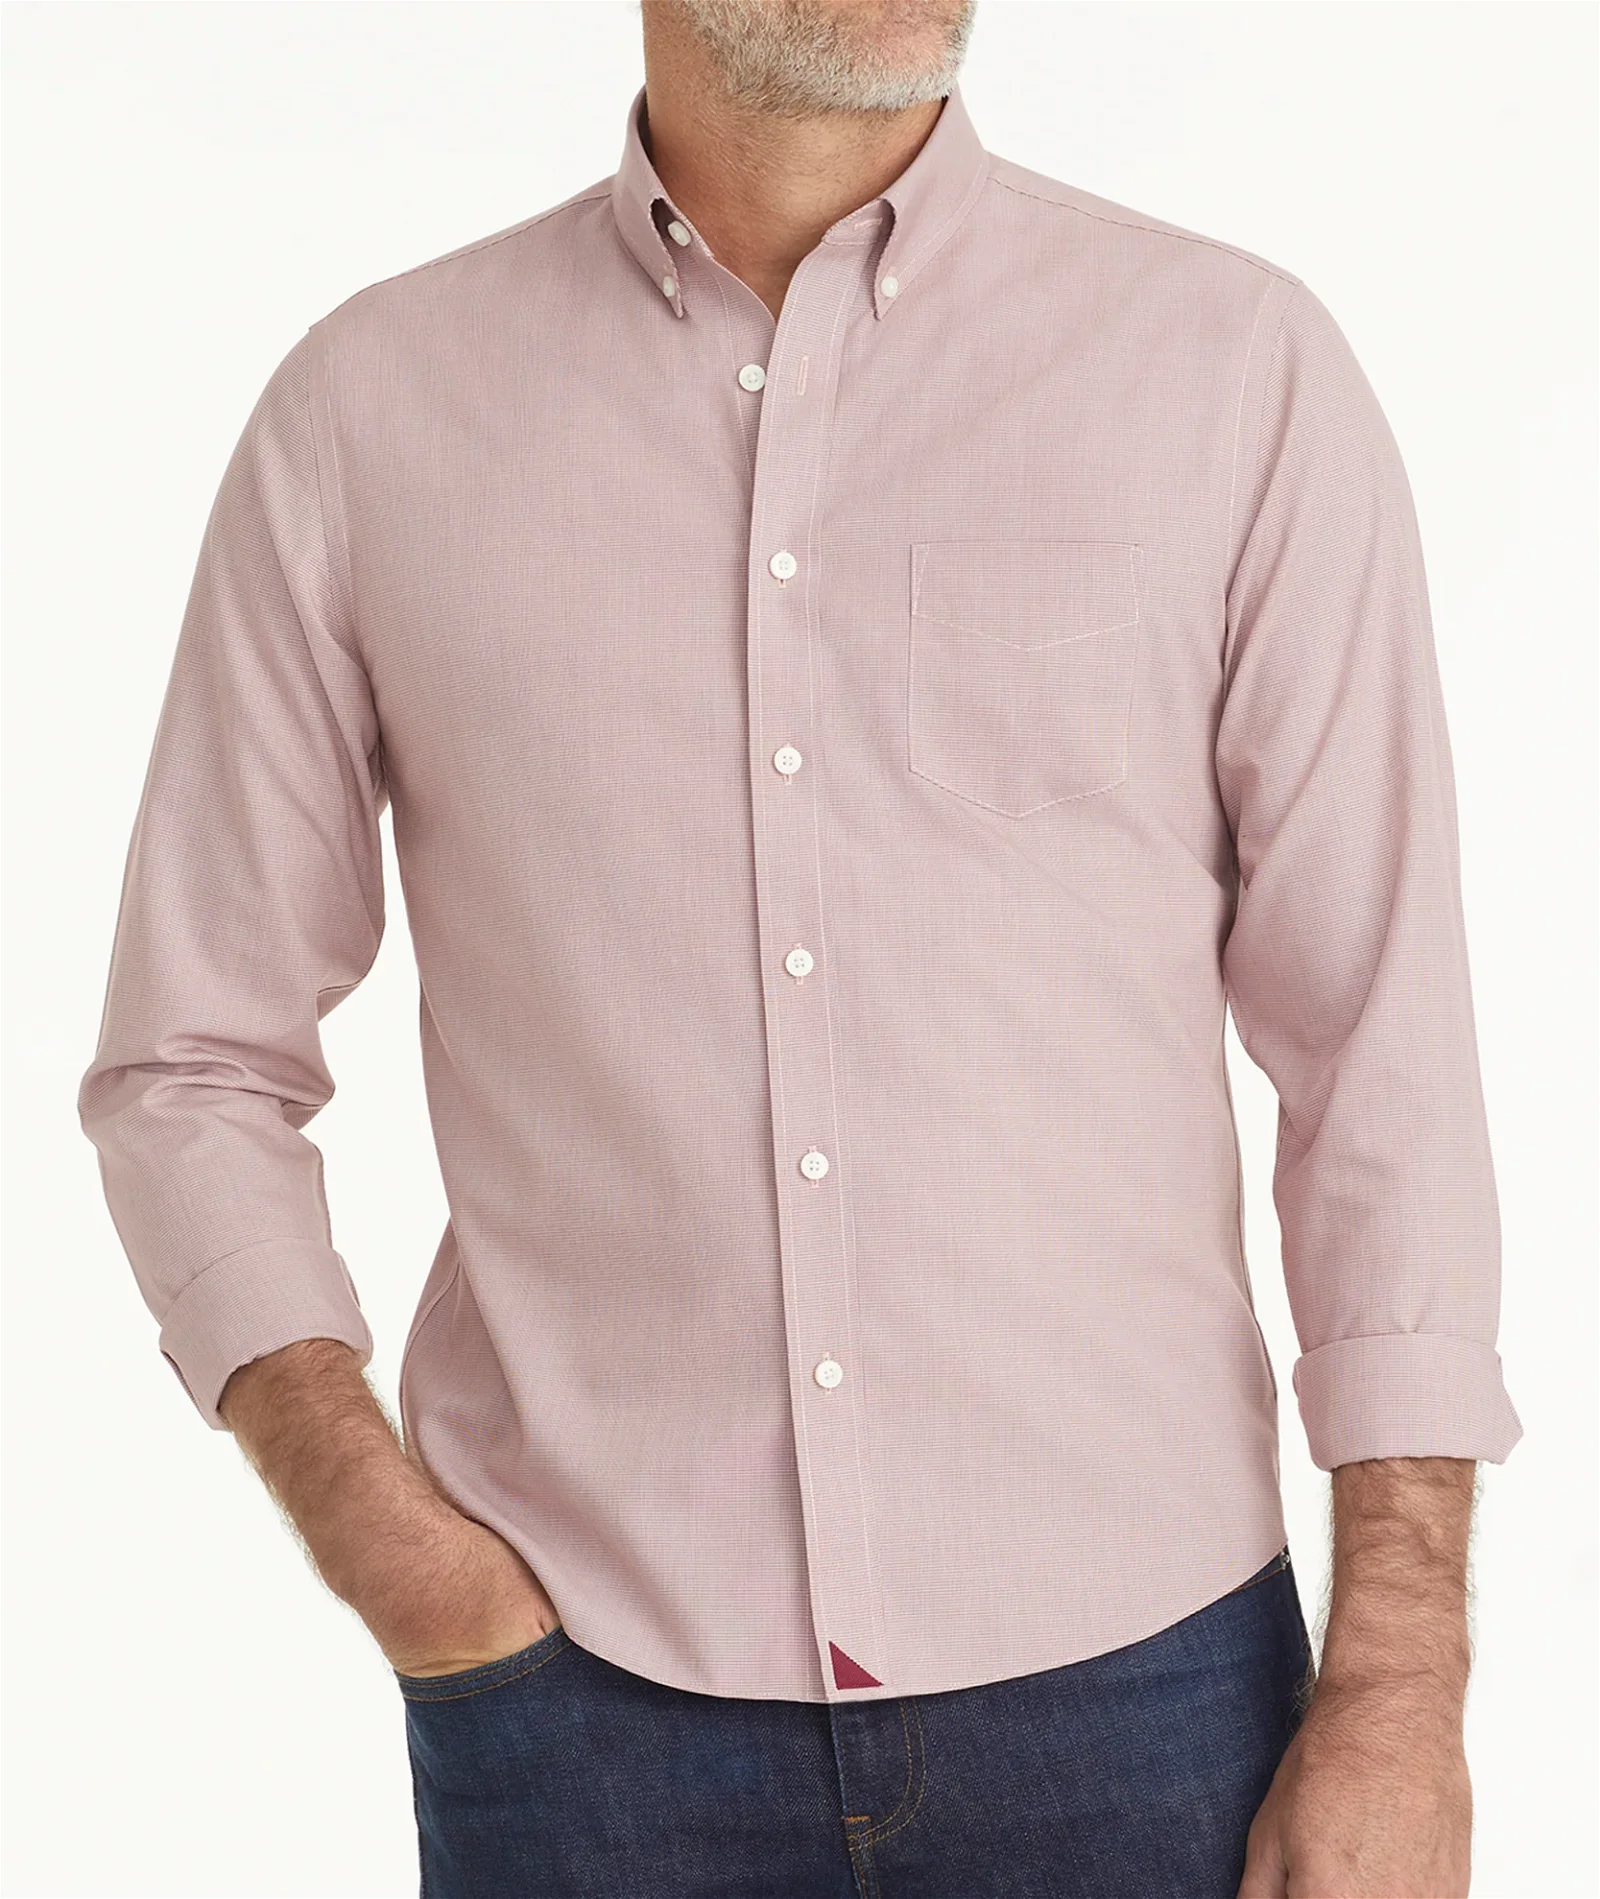 Image of Wrinkle-Free Cadetto Shirt - FINAL SALE